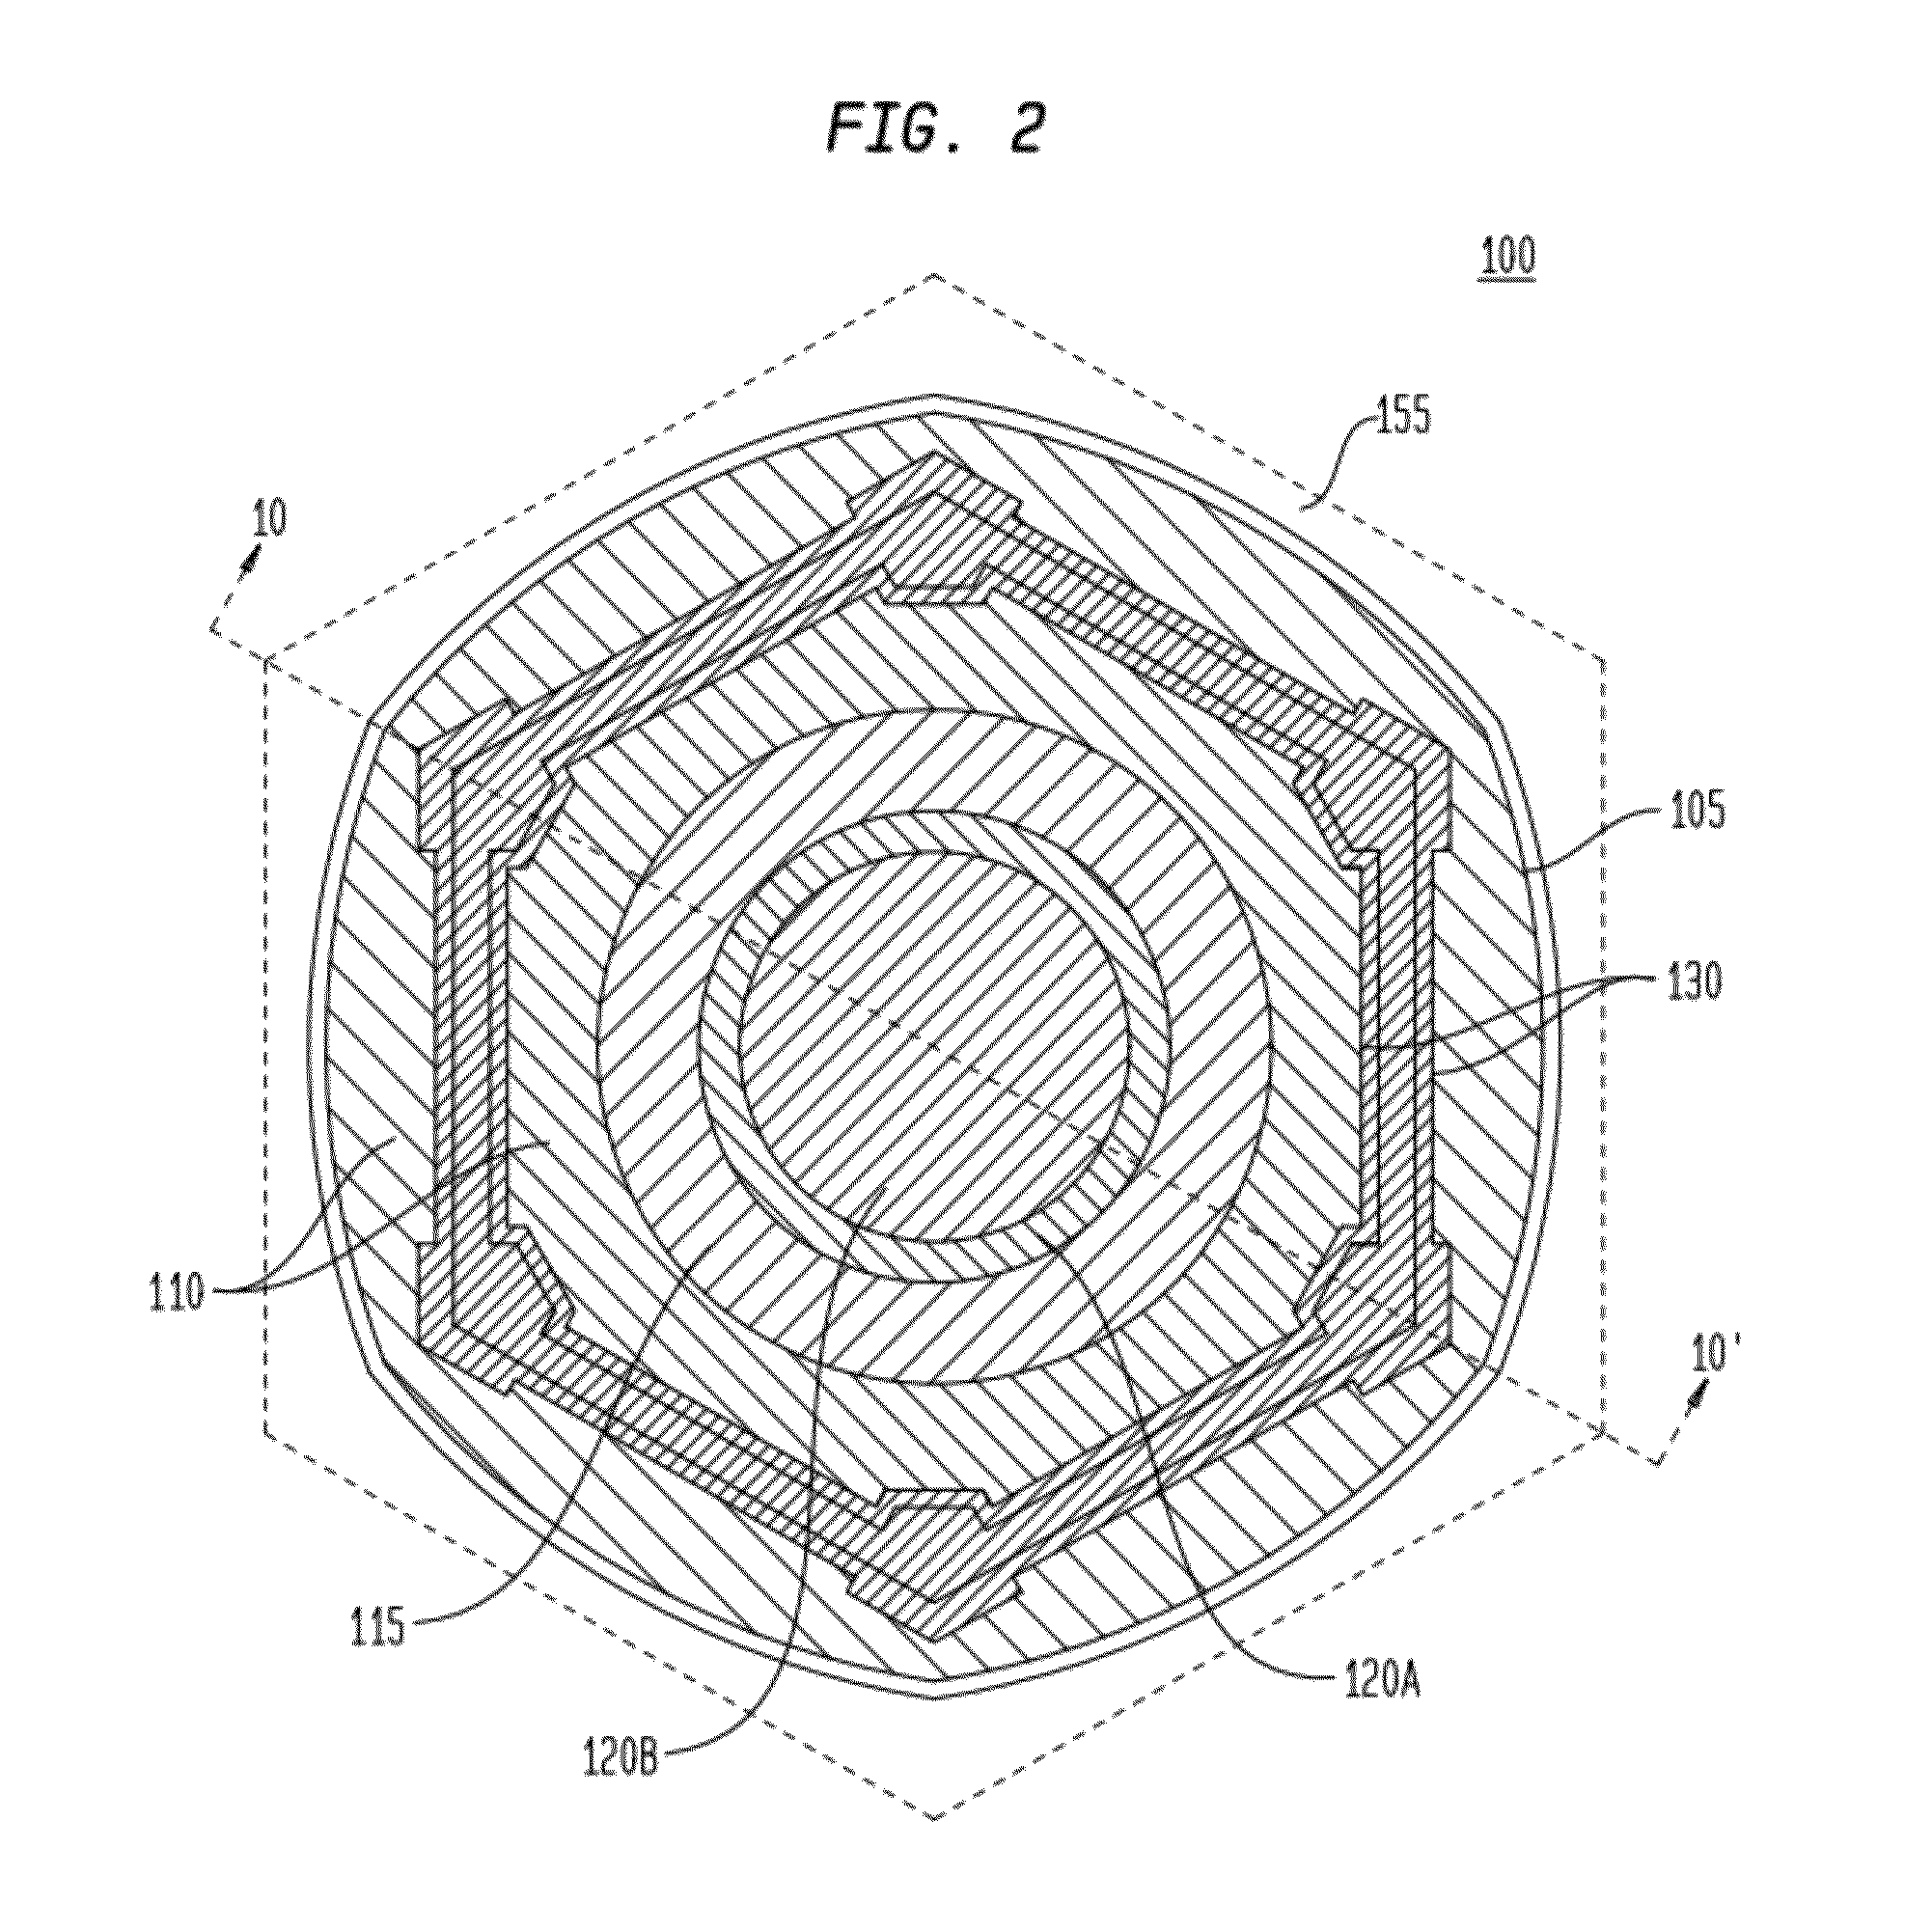 Printable composition of a liquid or gel suspension of diodes